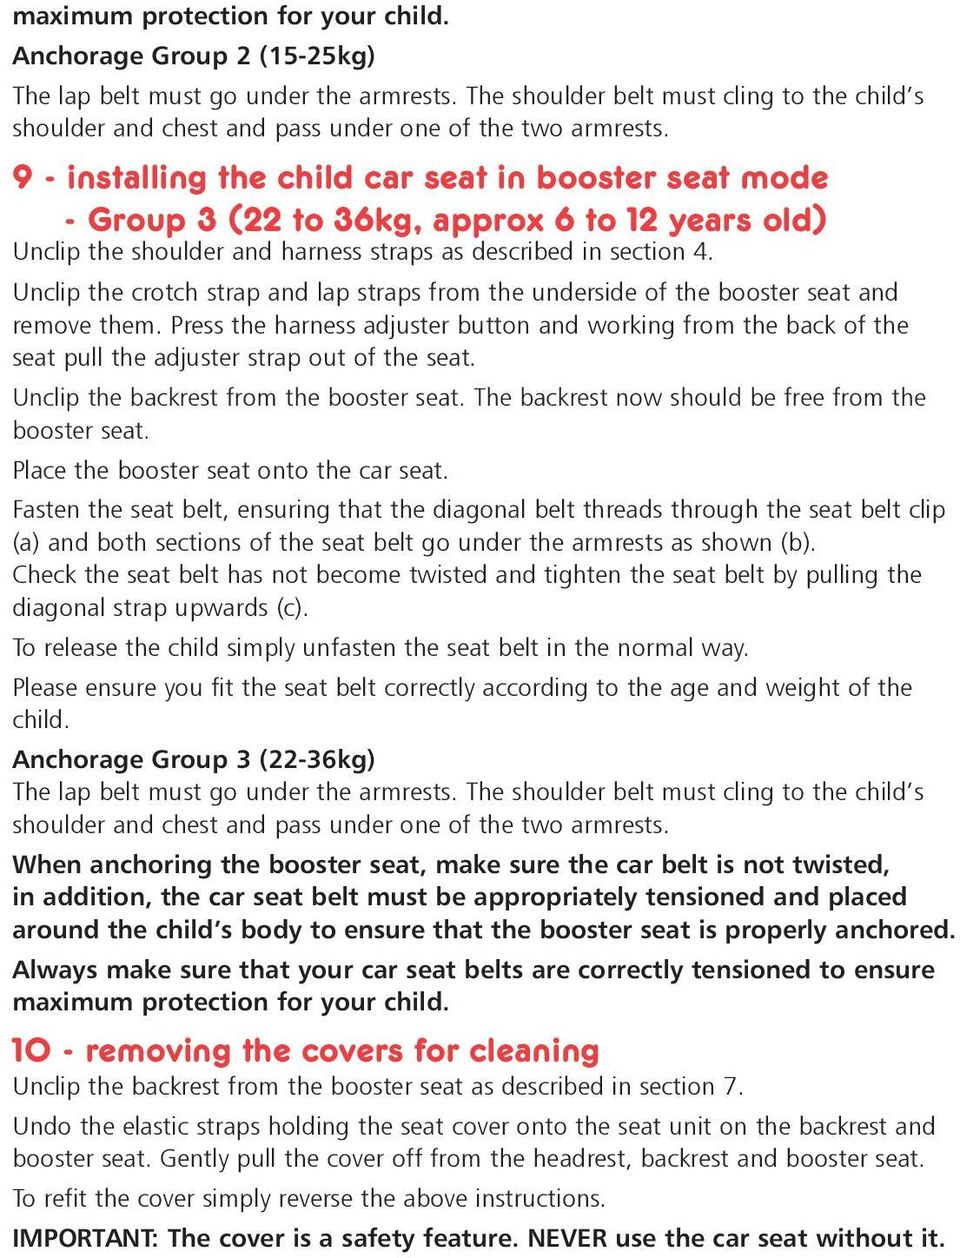 9 - installing the child car seat in booster seat mode - Group 3 (22 to 36kg, approx 6 to 12 years old) Unclip the shoulder and harness straps as described in section 4.